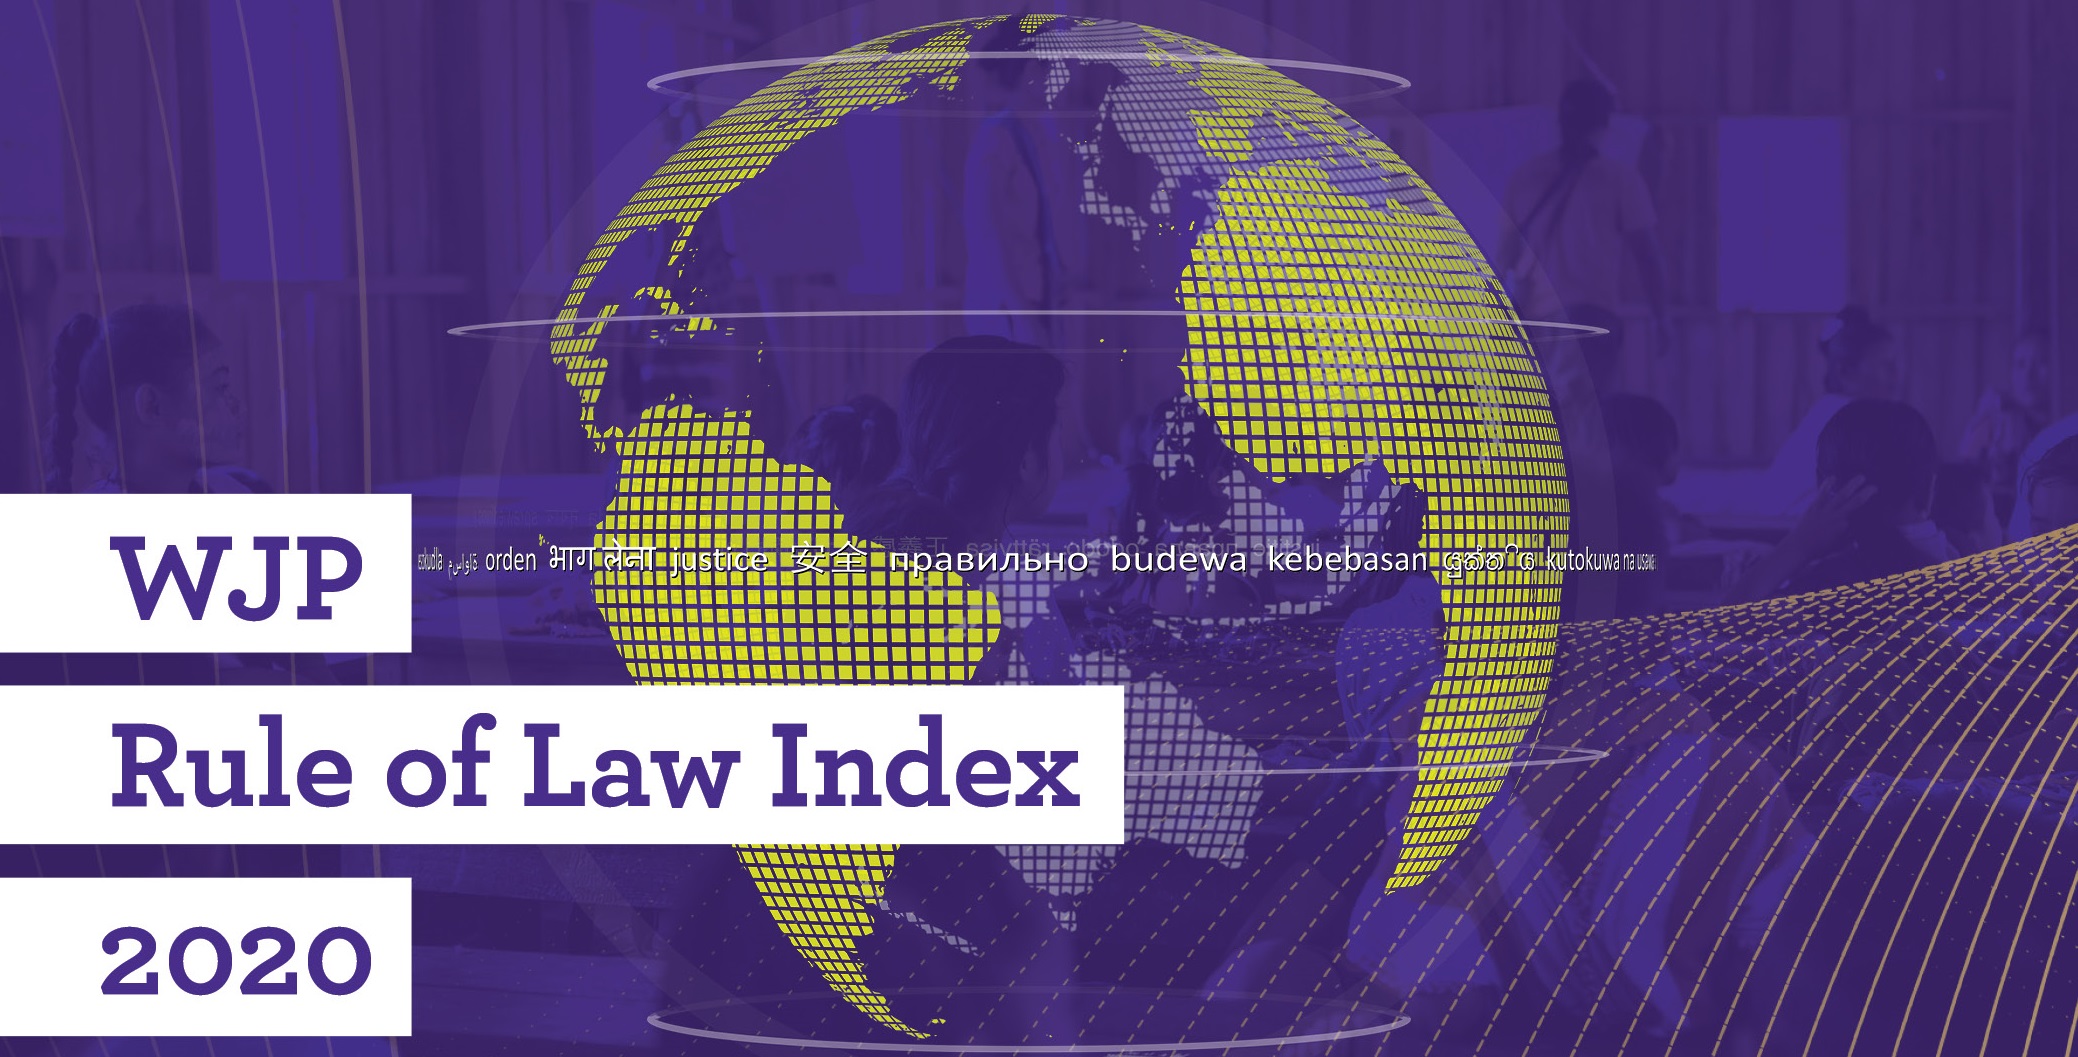 MONGOLIA RANKED 57 OUT OF 128 COUNTRIES ON RULE OF LAW